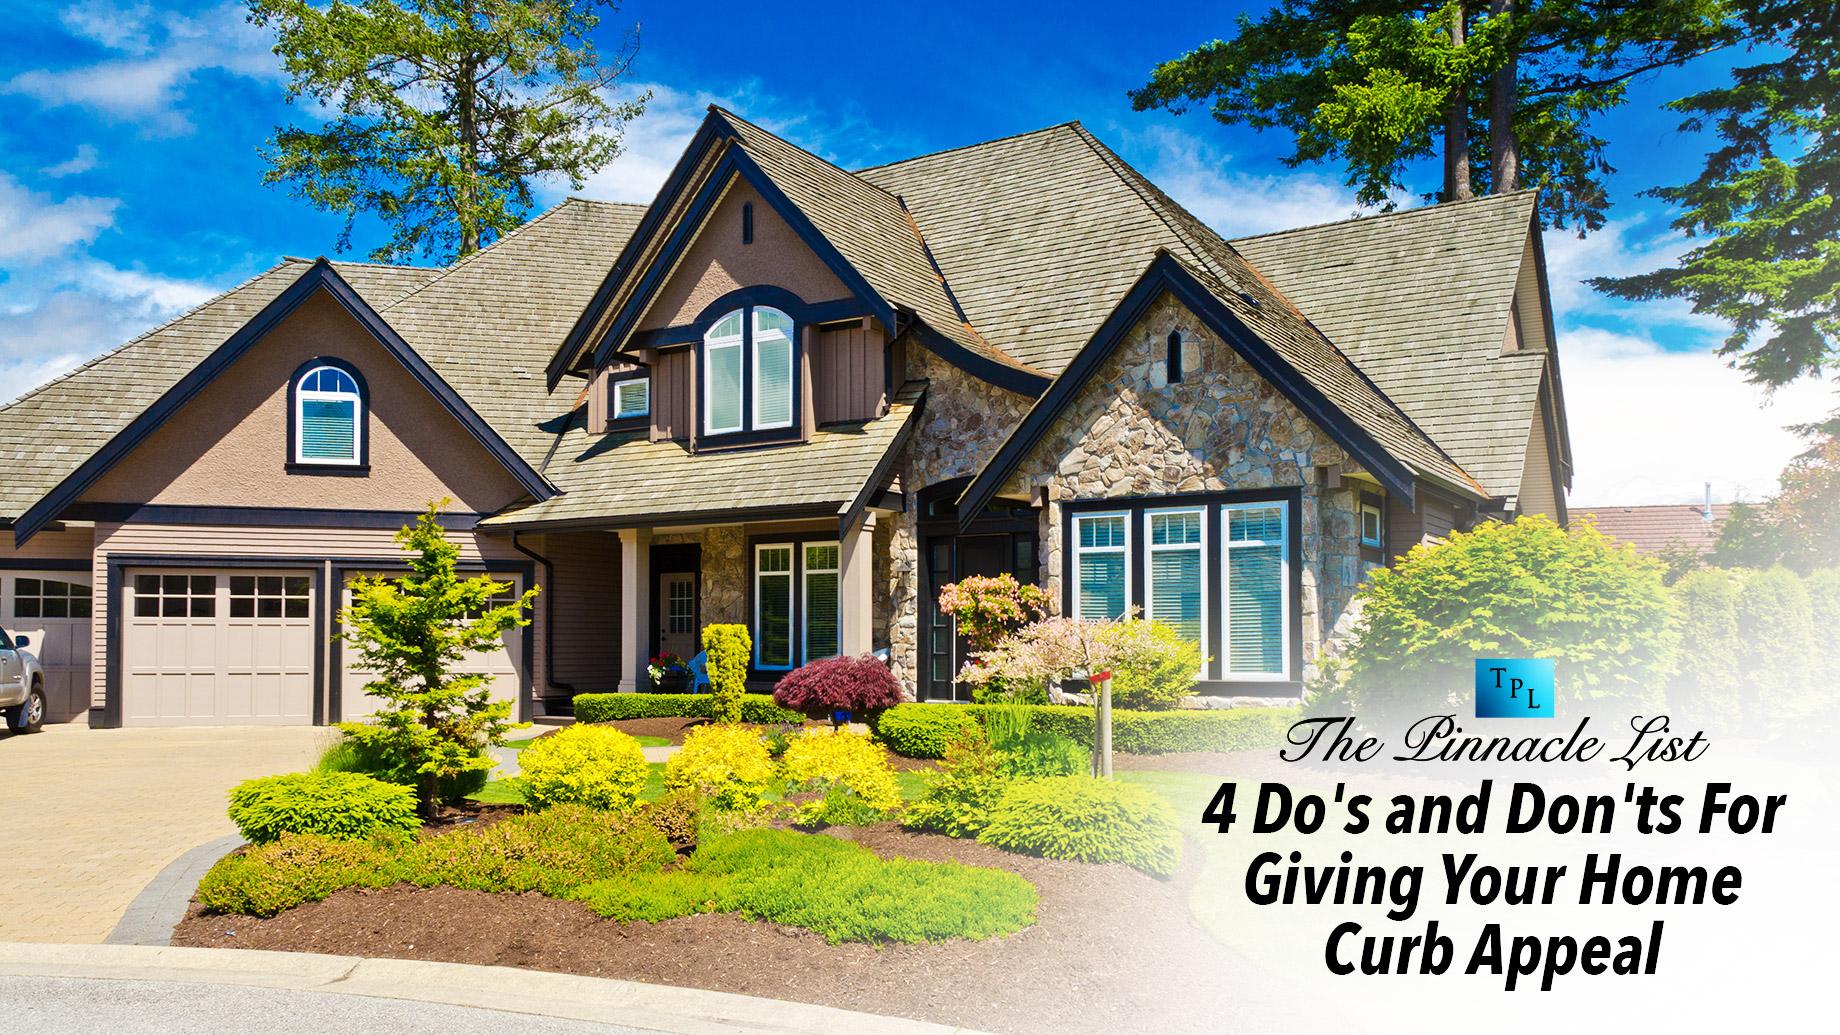 4 Do's and Don'ts For Giving Your Home Curb Appeal